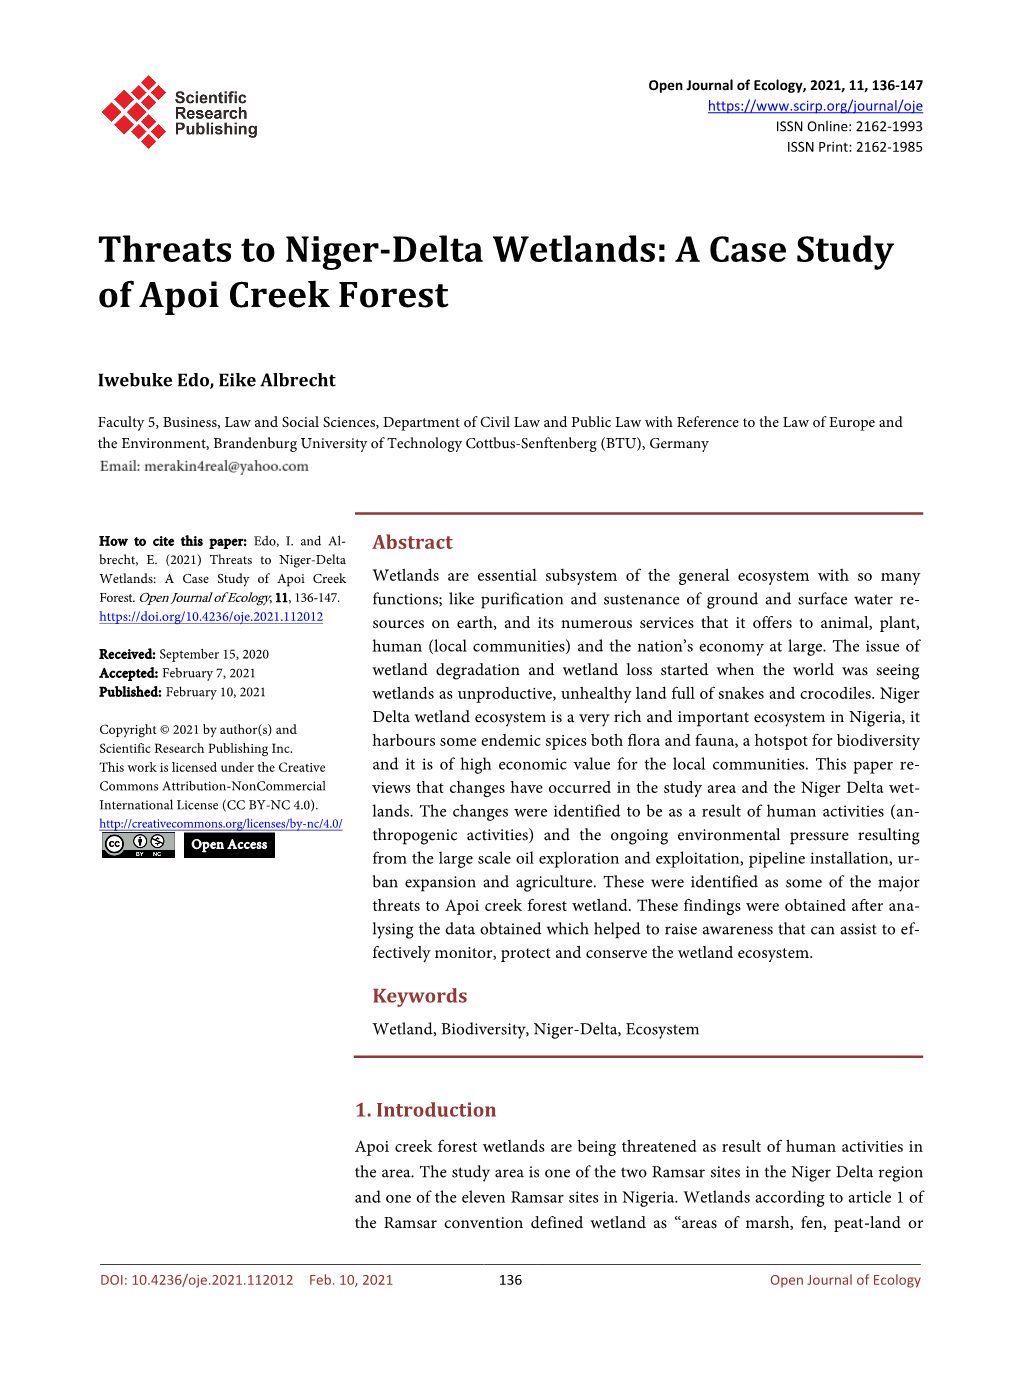 Threats to Niger-Delta Wetlands: a Case Study of Apoi Creek Forest